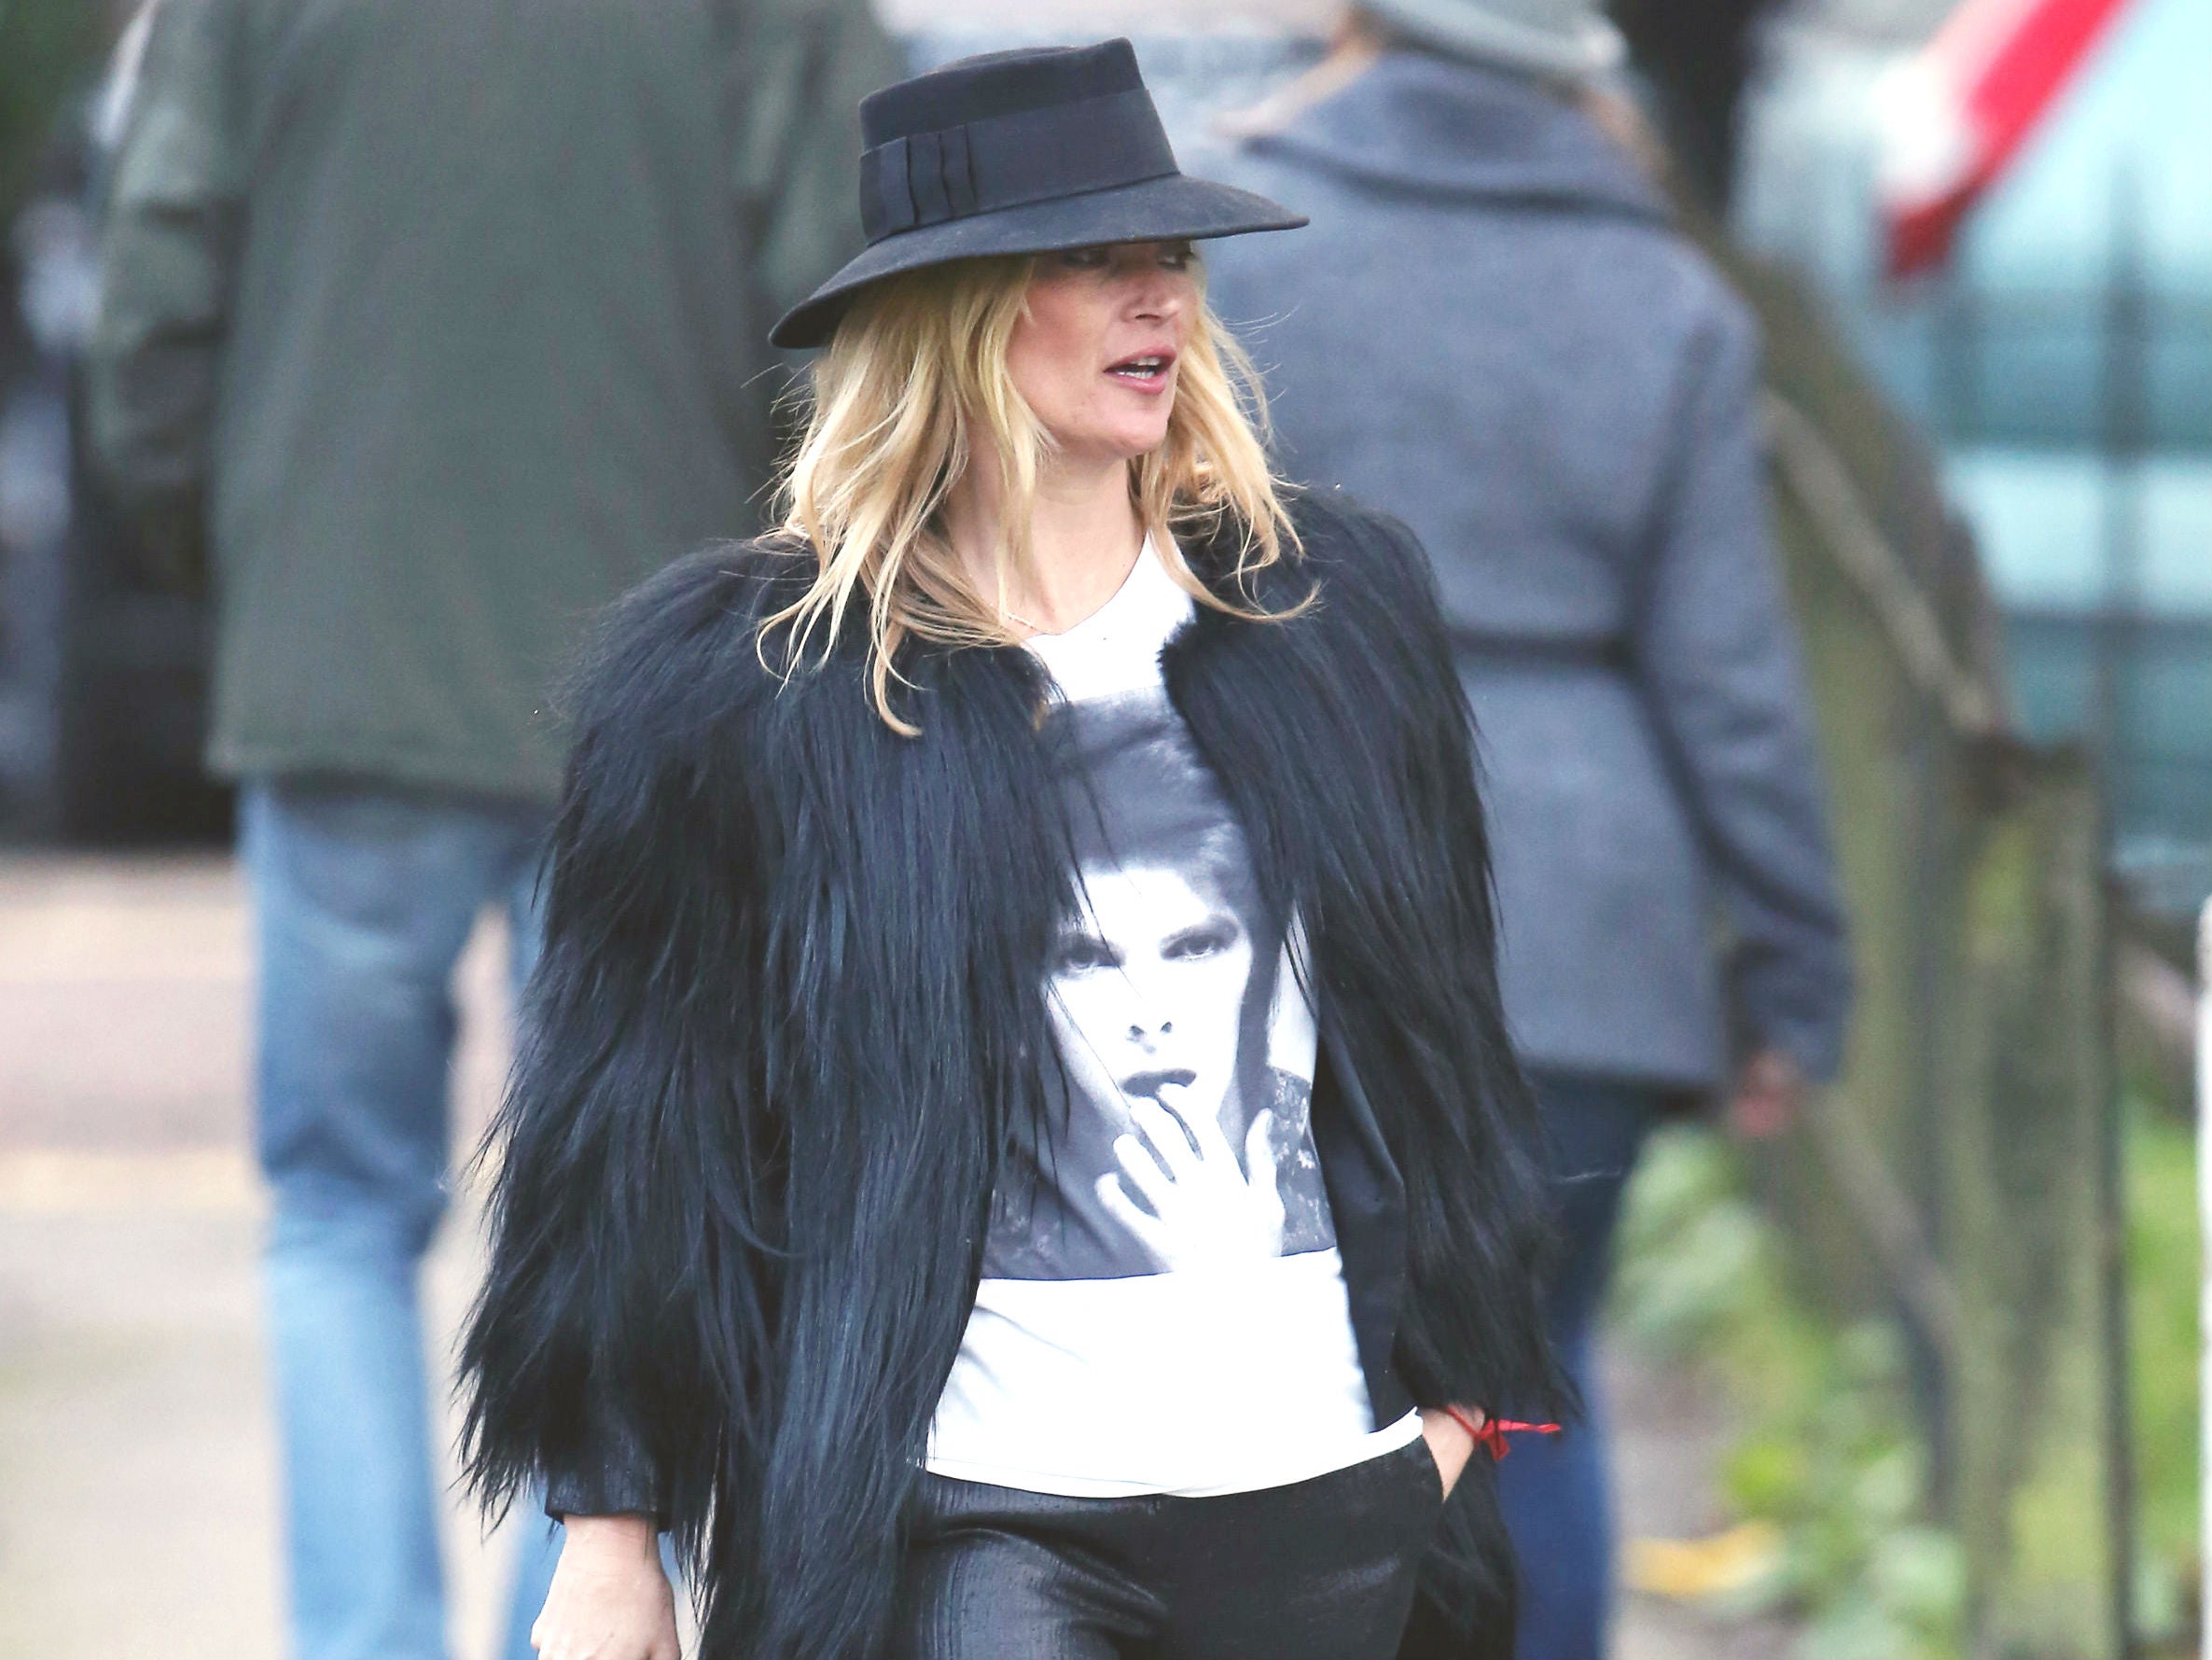 Kate Moss Pays Tribute To David Bowie Through Her Outfit Choice The Independent The Independent